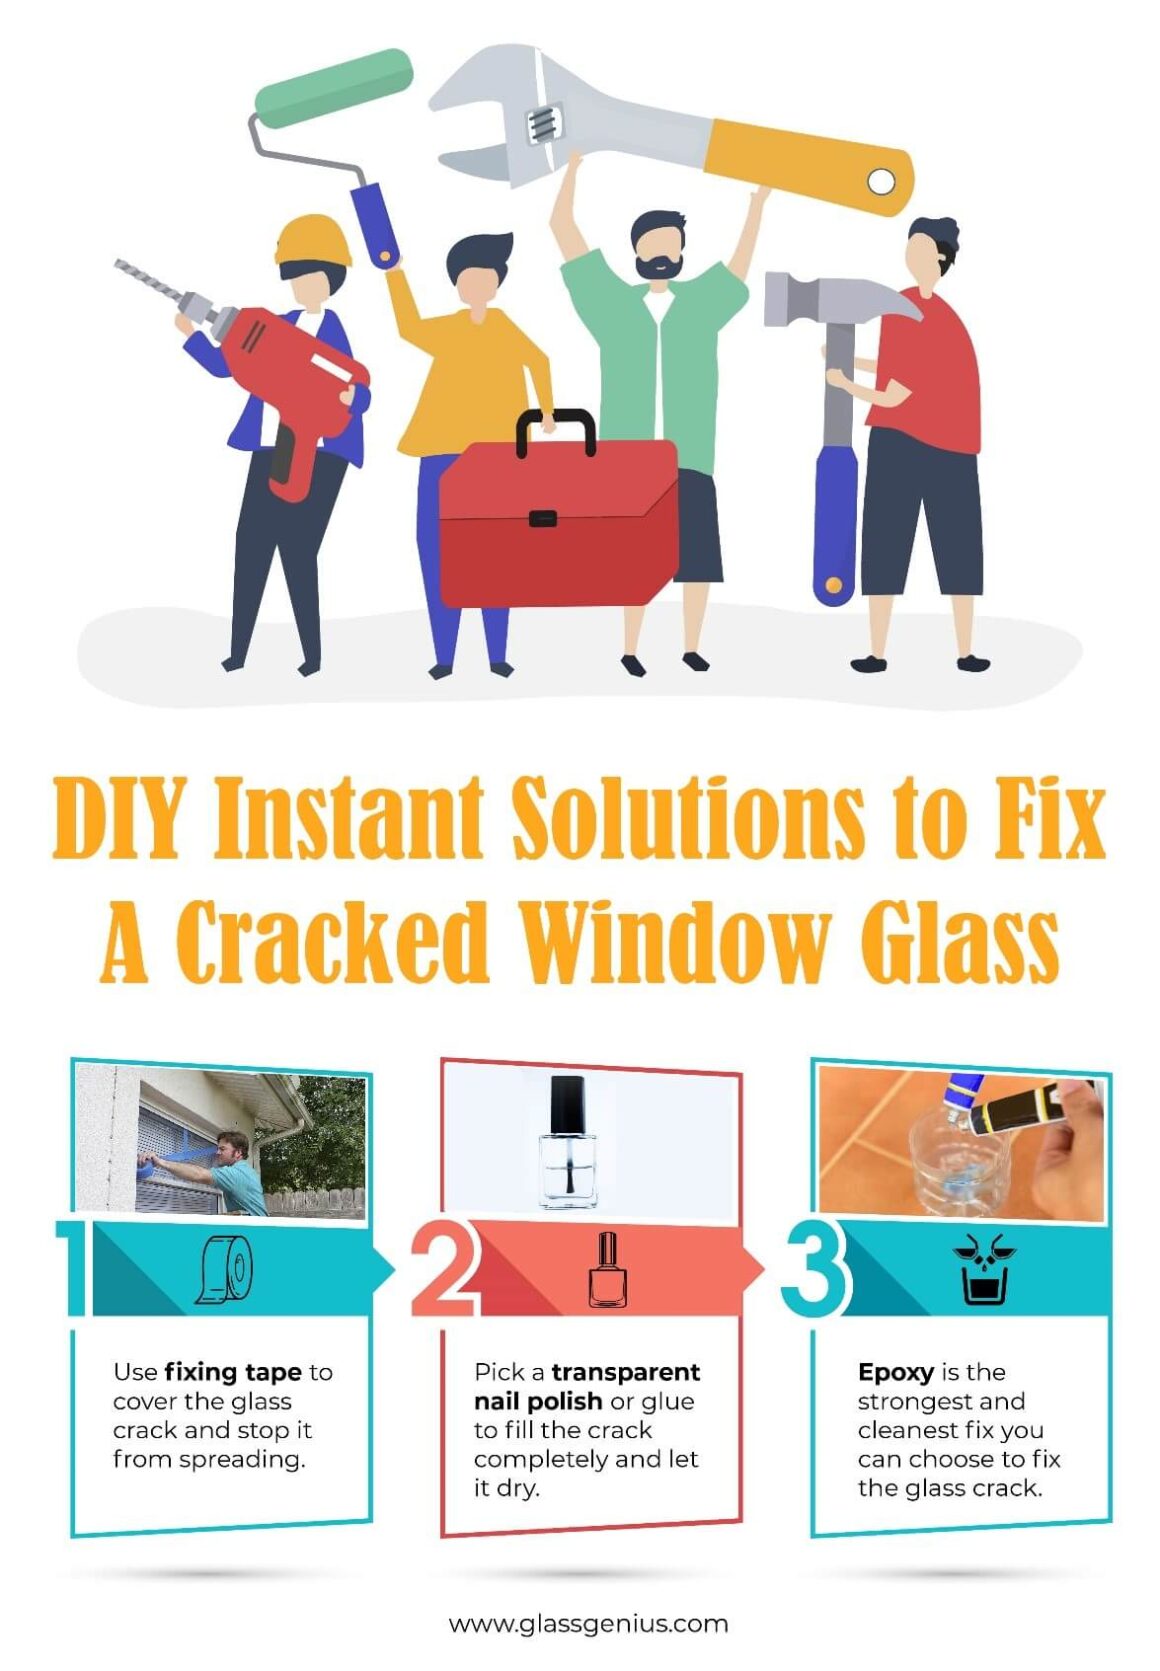 The Ultimate Guide to DIY Fix Cracked Window Glass at Your Home